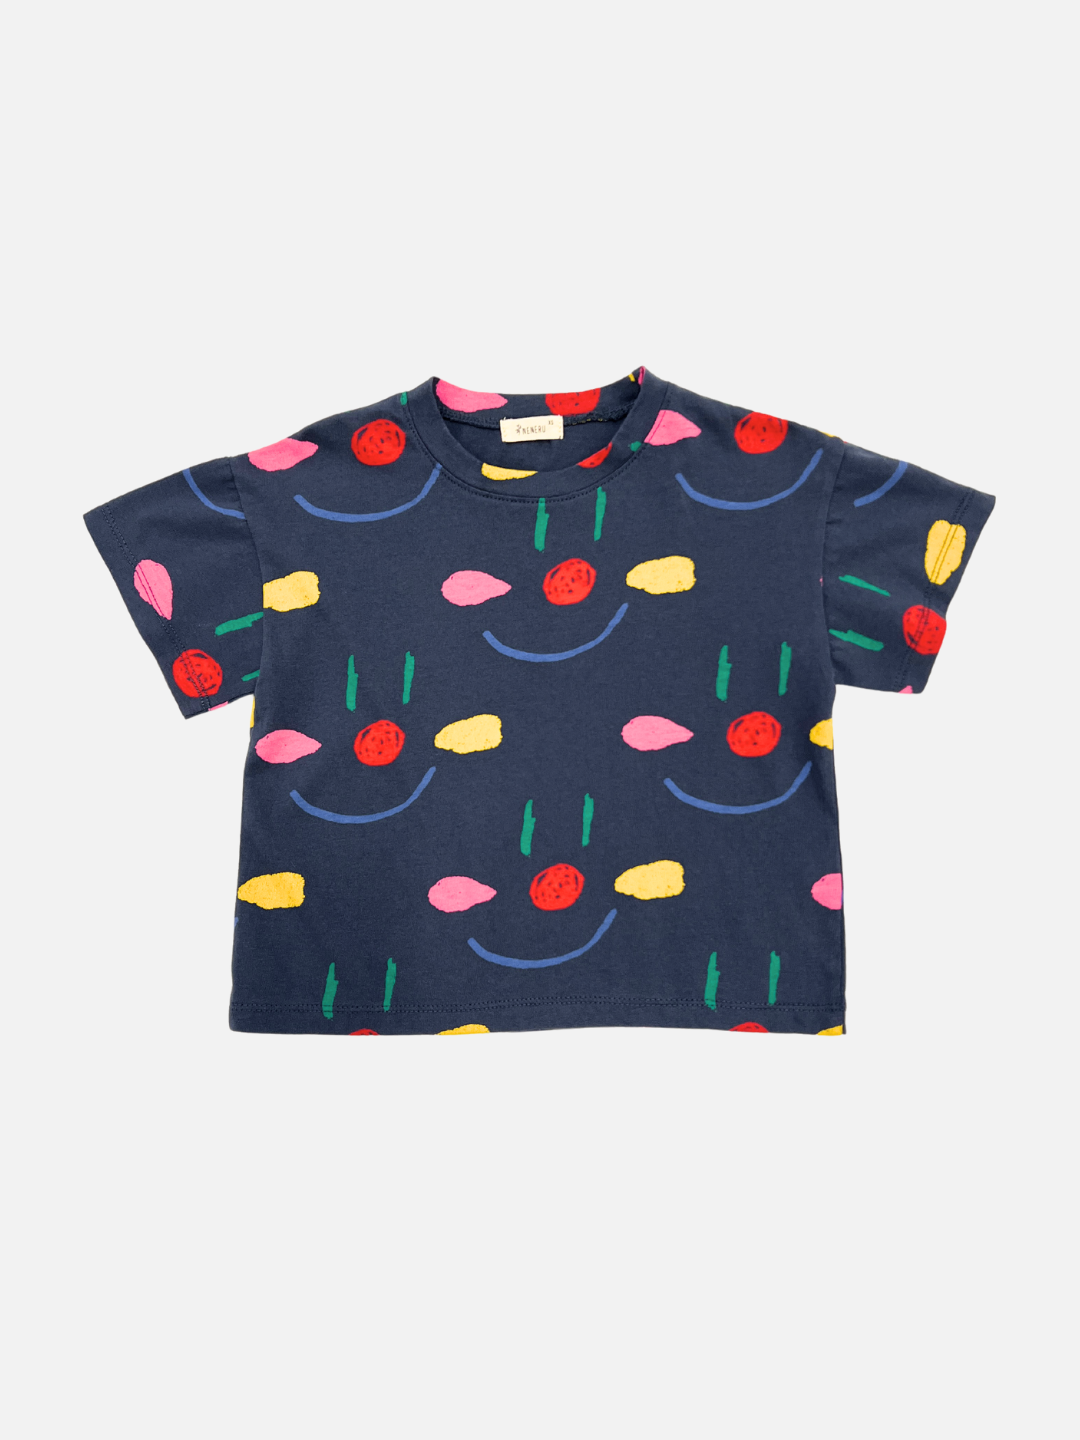 Navy | Front view of the kid's Facepaint tee in Navy covered with an all-over clown like painted faces